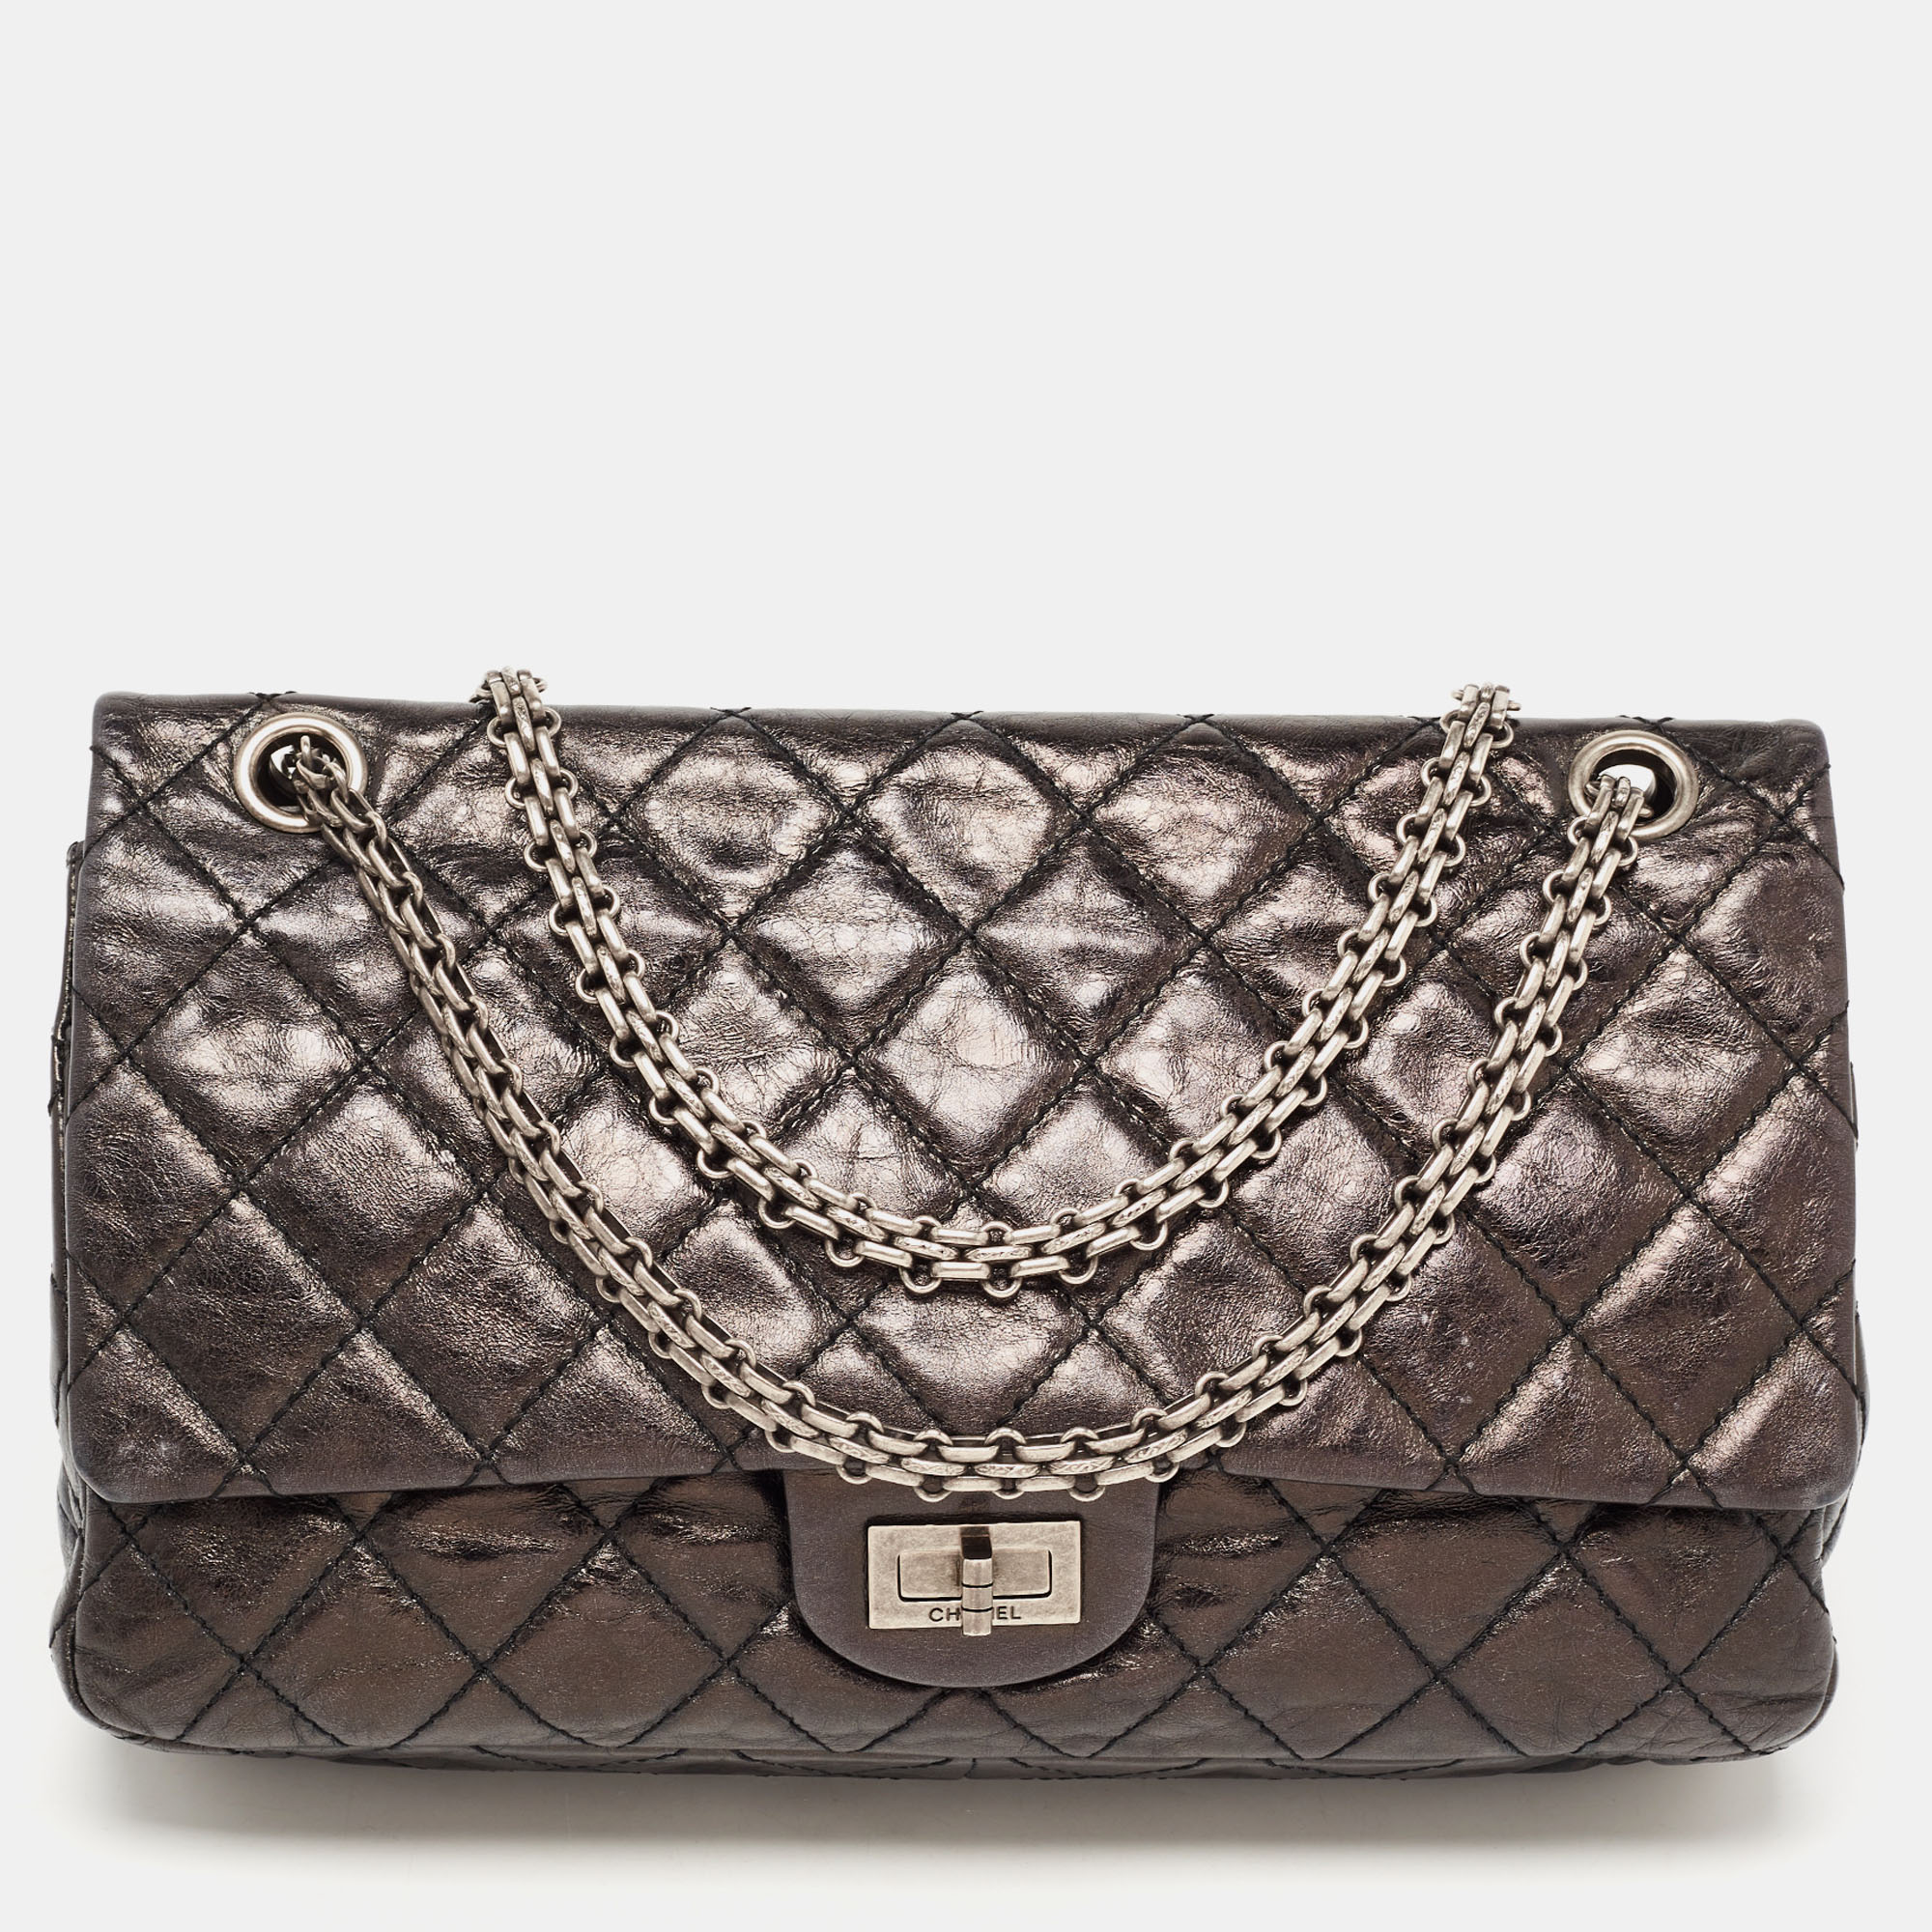 Pre-owned Chanel Metallic Grey/black Quilted Leather 226 Reissue 2.55 Flap Bag